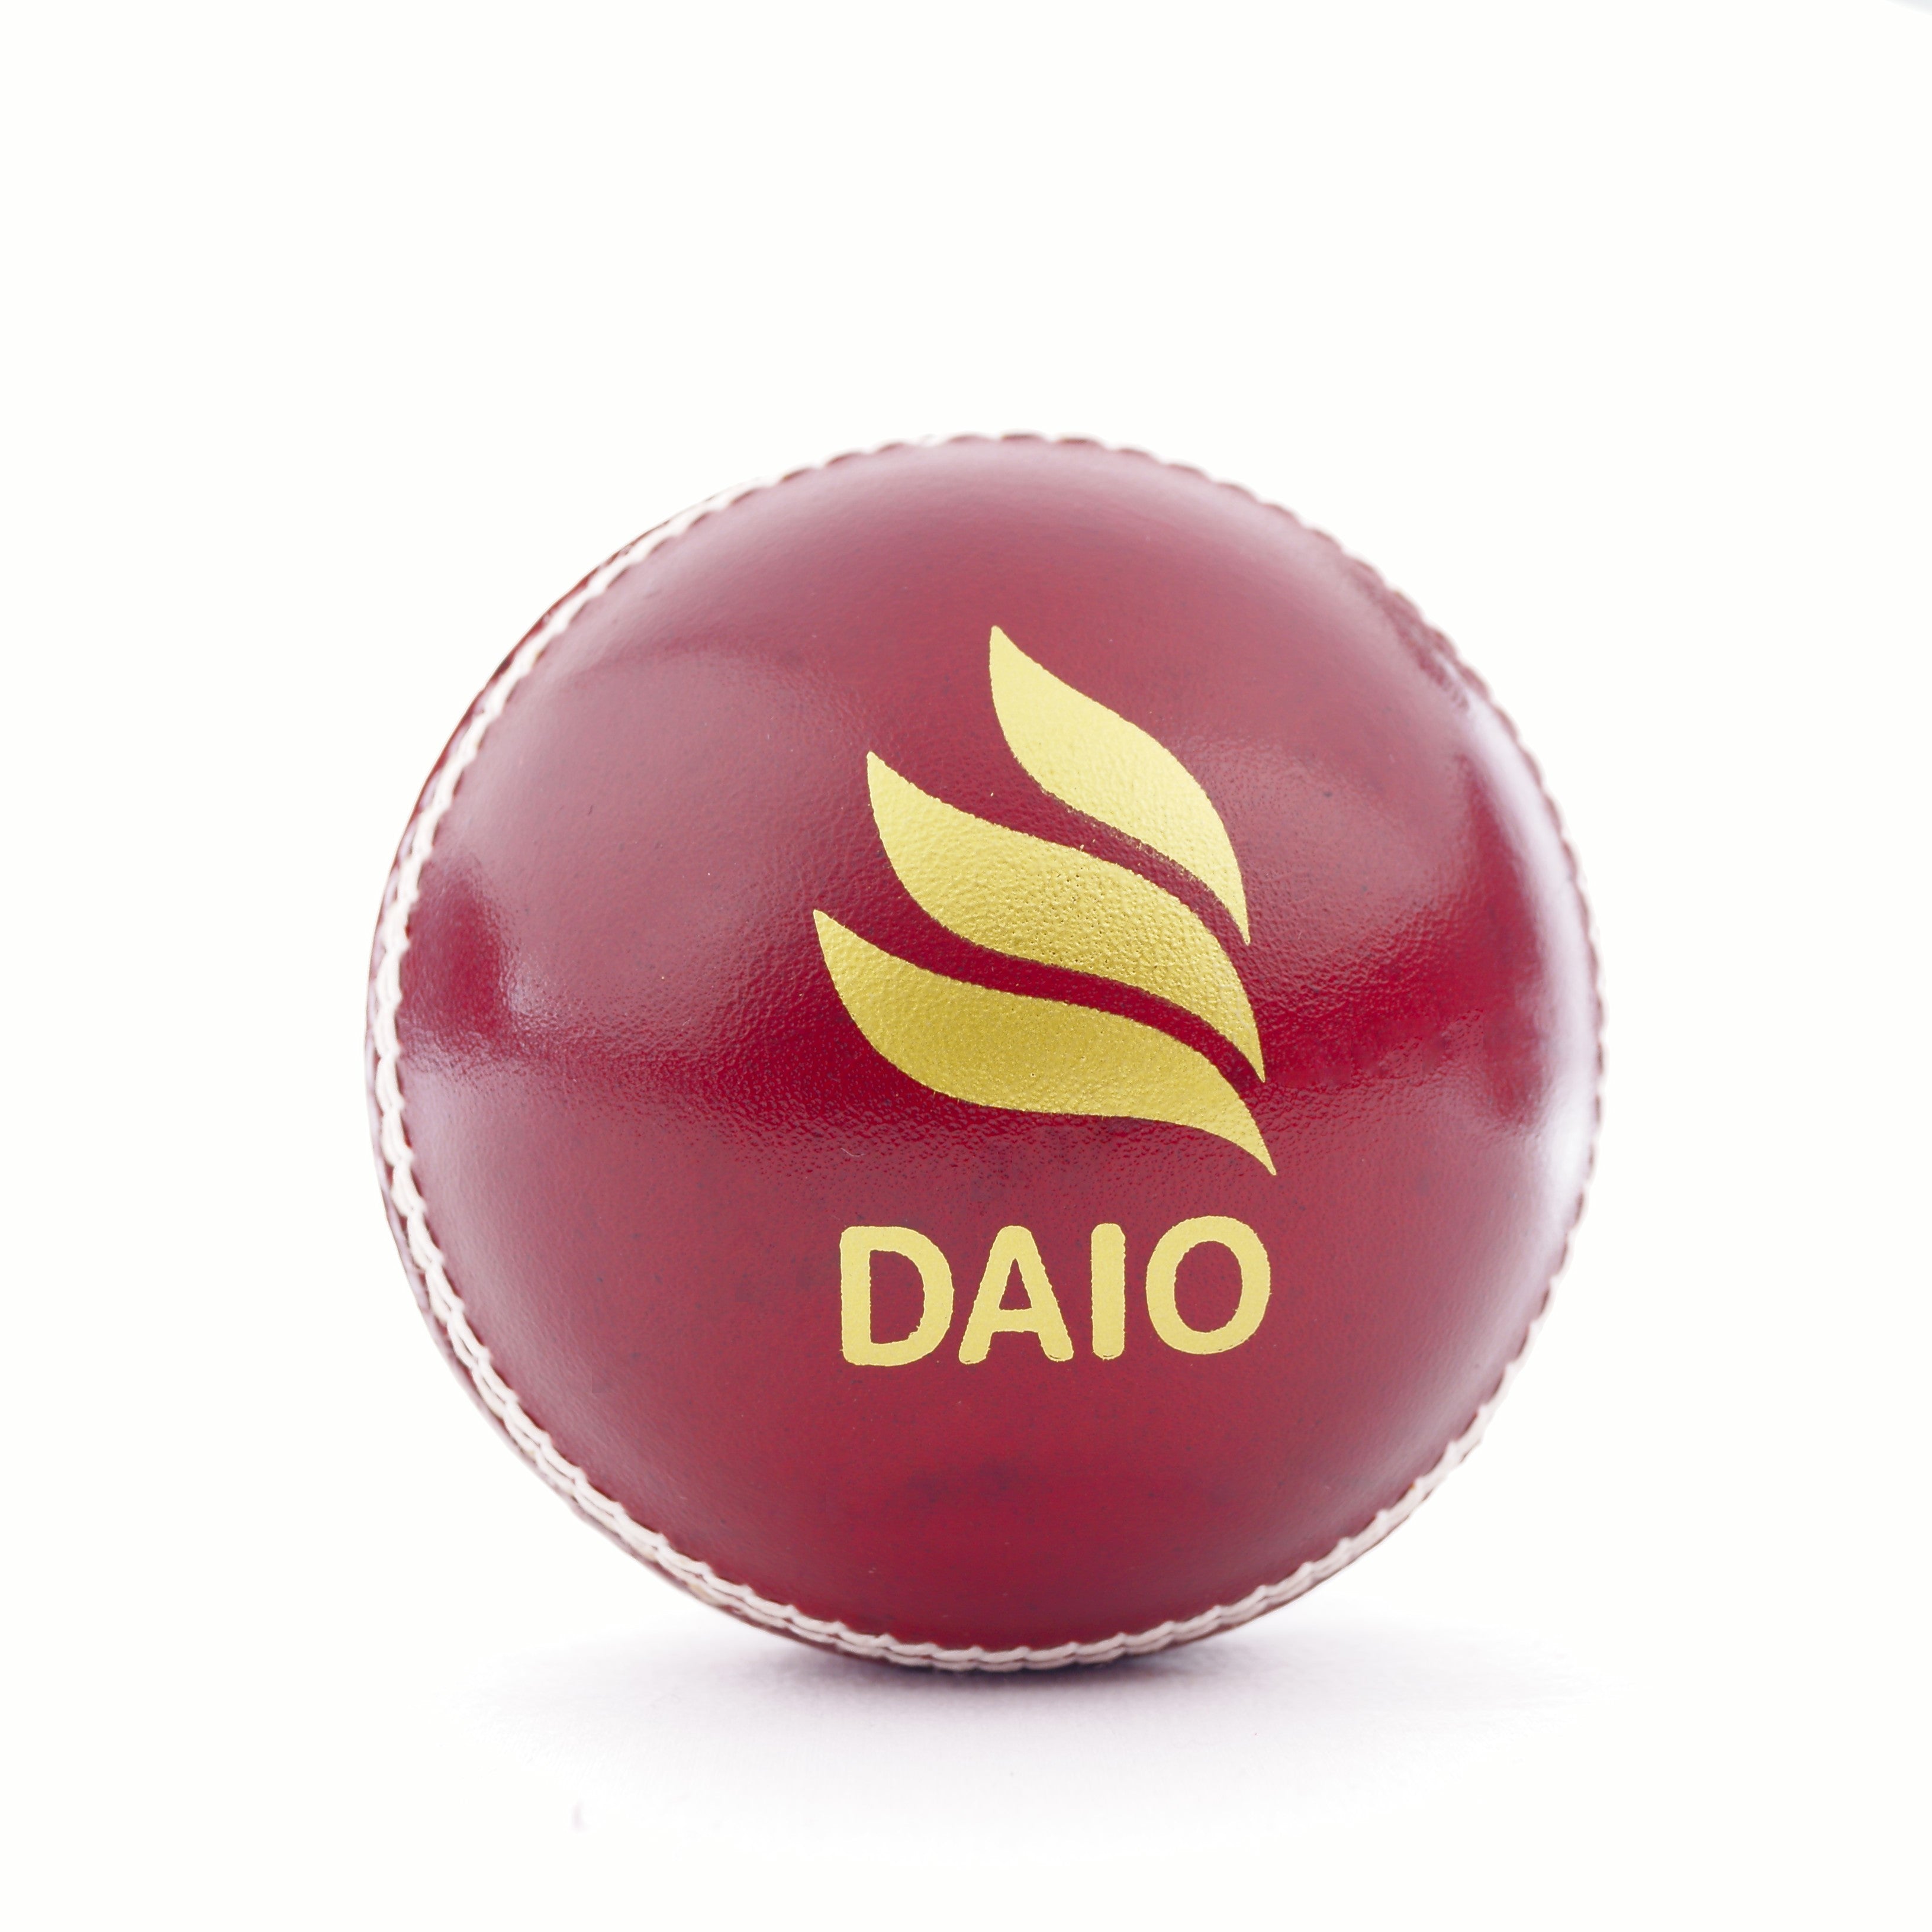 2 Pcs. Daio red junior leather ball